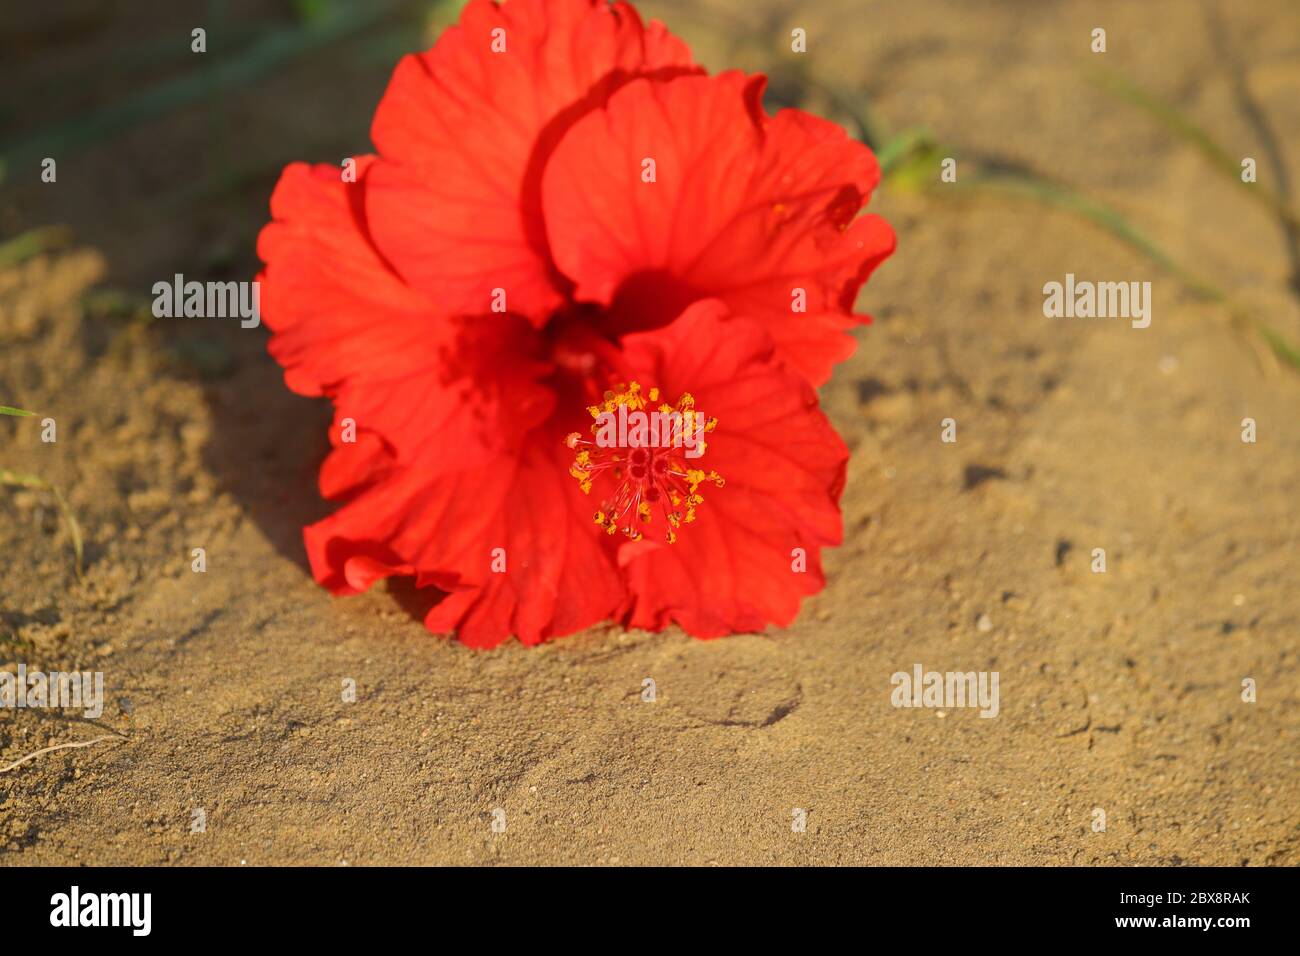 royalty free red hibiscus flower image, red hibiscus flower laying on ground, macro hd image Stock Photo